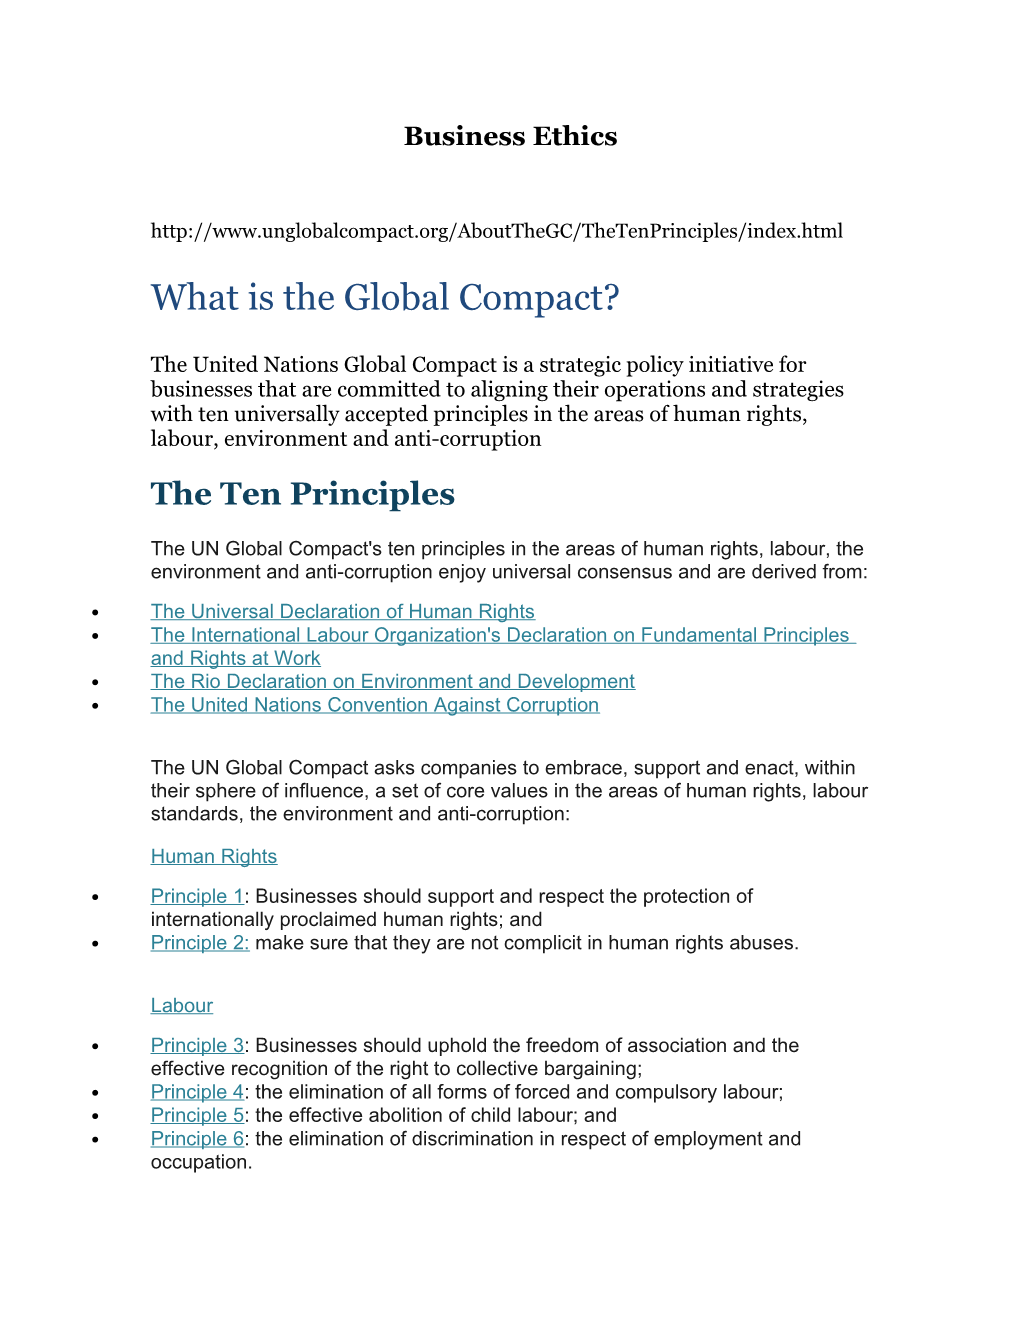 What Is the Global Compact?